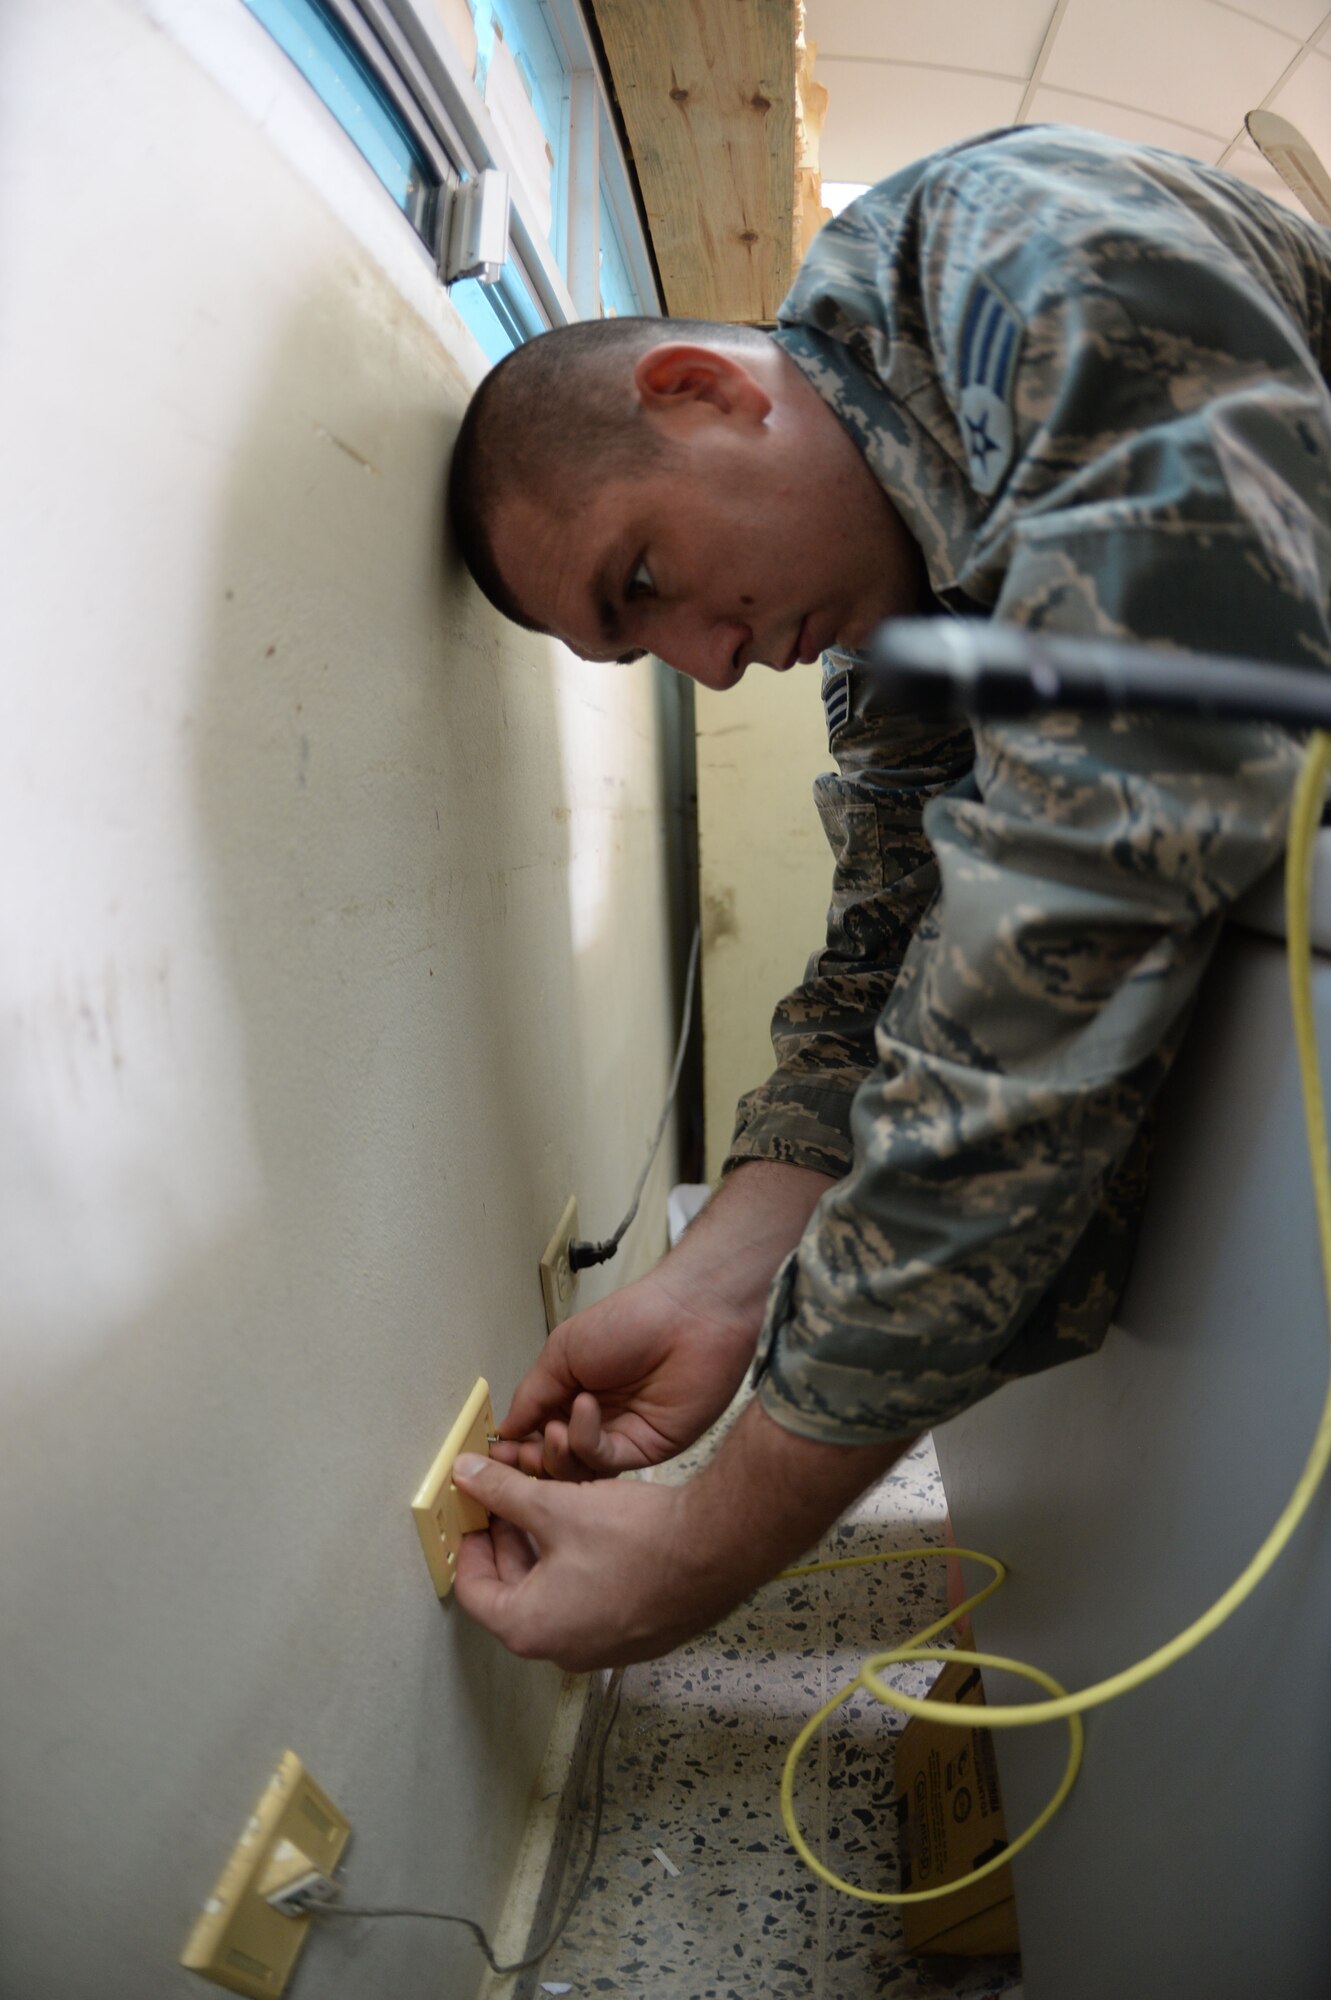 U.S. Air Force Senior Airman Christopher Harkins 35th Combat Communications Squadron radio frequency transmissions craftsman, checks an ethernet port at the Dr. Salvador Paredes Hospital in Trujillo, Honduras, July 9, 2015, Harkins is in the hospital to repair its ailing network infrastructure as part of the New Horizons Honduras 2015 training exercise. 

New Horizons was launched in the 1980s and is an annual joint humanitarian assistance exercise that U.S. Southern Command conducts with a partner nation in Central America, South America or the Caribbean. The exercise improves joint training readiness of U.S. and partner nation civil engineers, medical professionals and support personnel through humanitarian assistance activities.

(U.S. Air Force photo by Capt. David J. Murphy/Released)